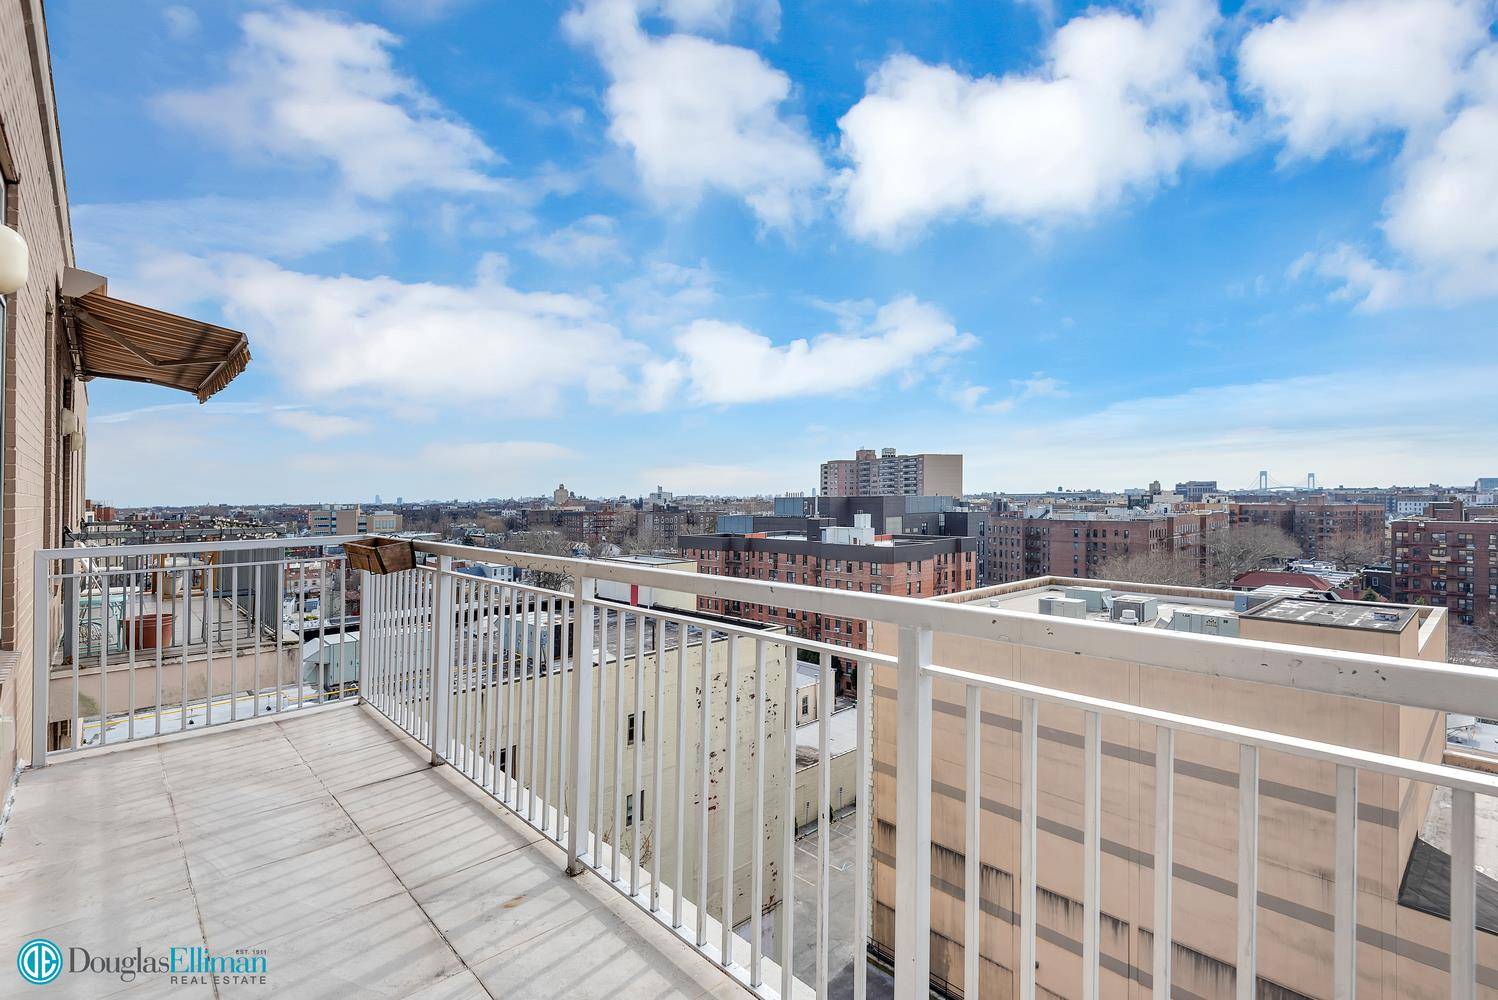 Beautiful, renovated, spacious two bedroom, two bathroom residence with a private balcony is situated on the top floor of an elevator equipped condominium building in Windsor Terrace, welcoming you to ...